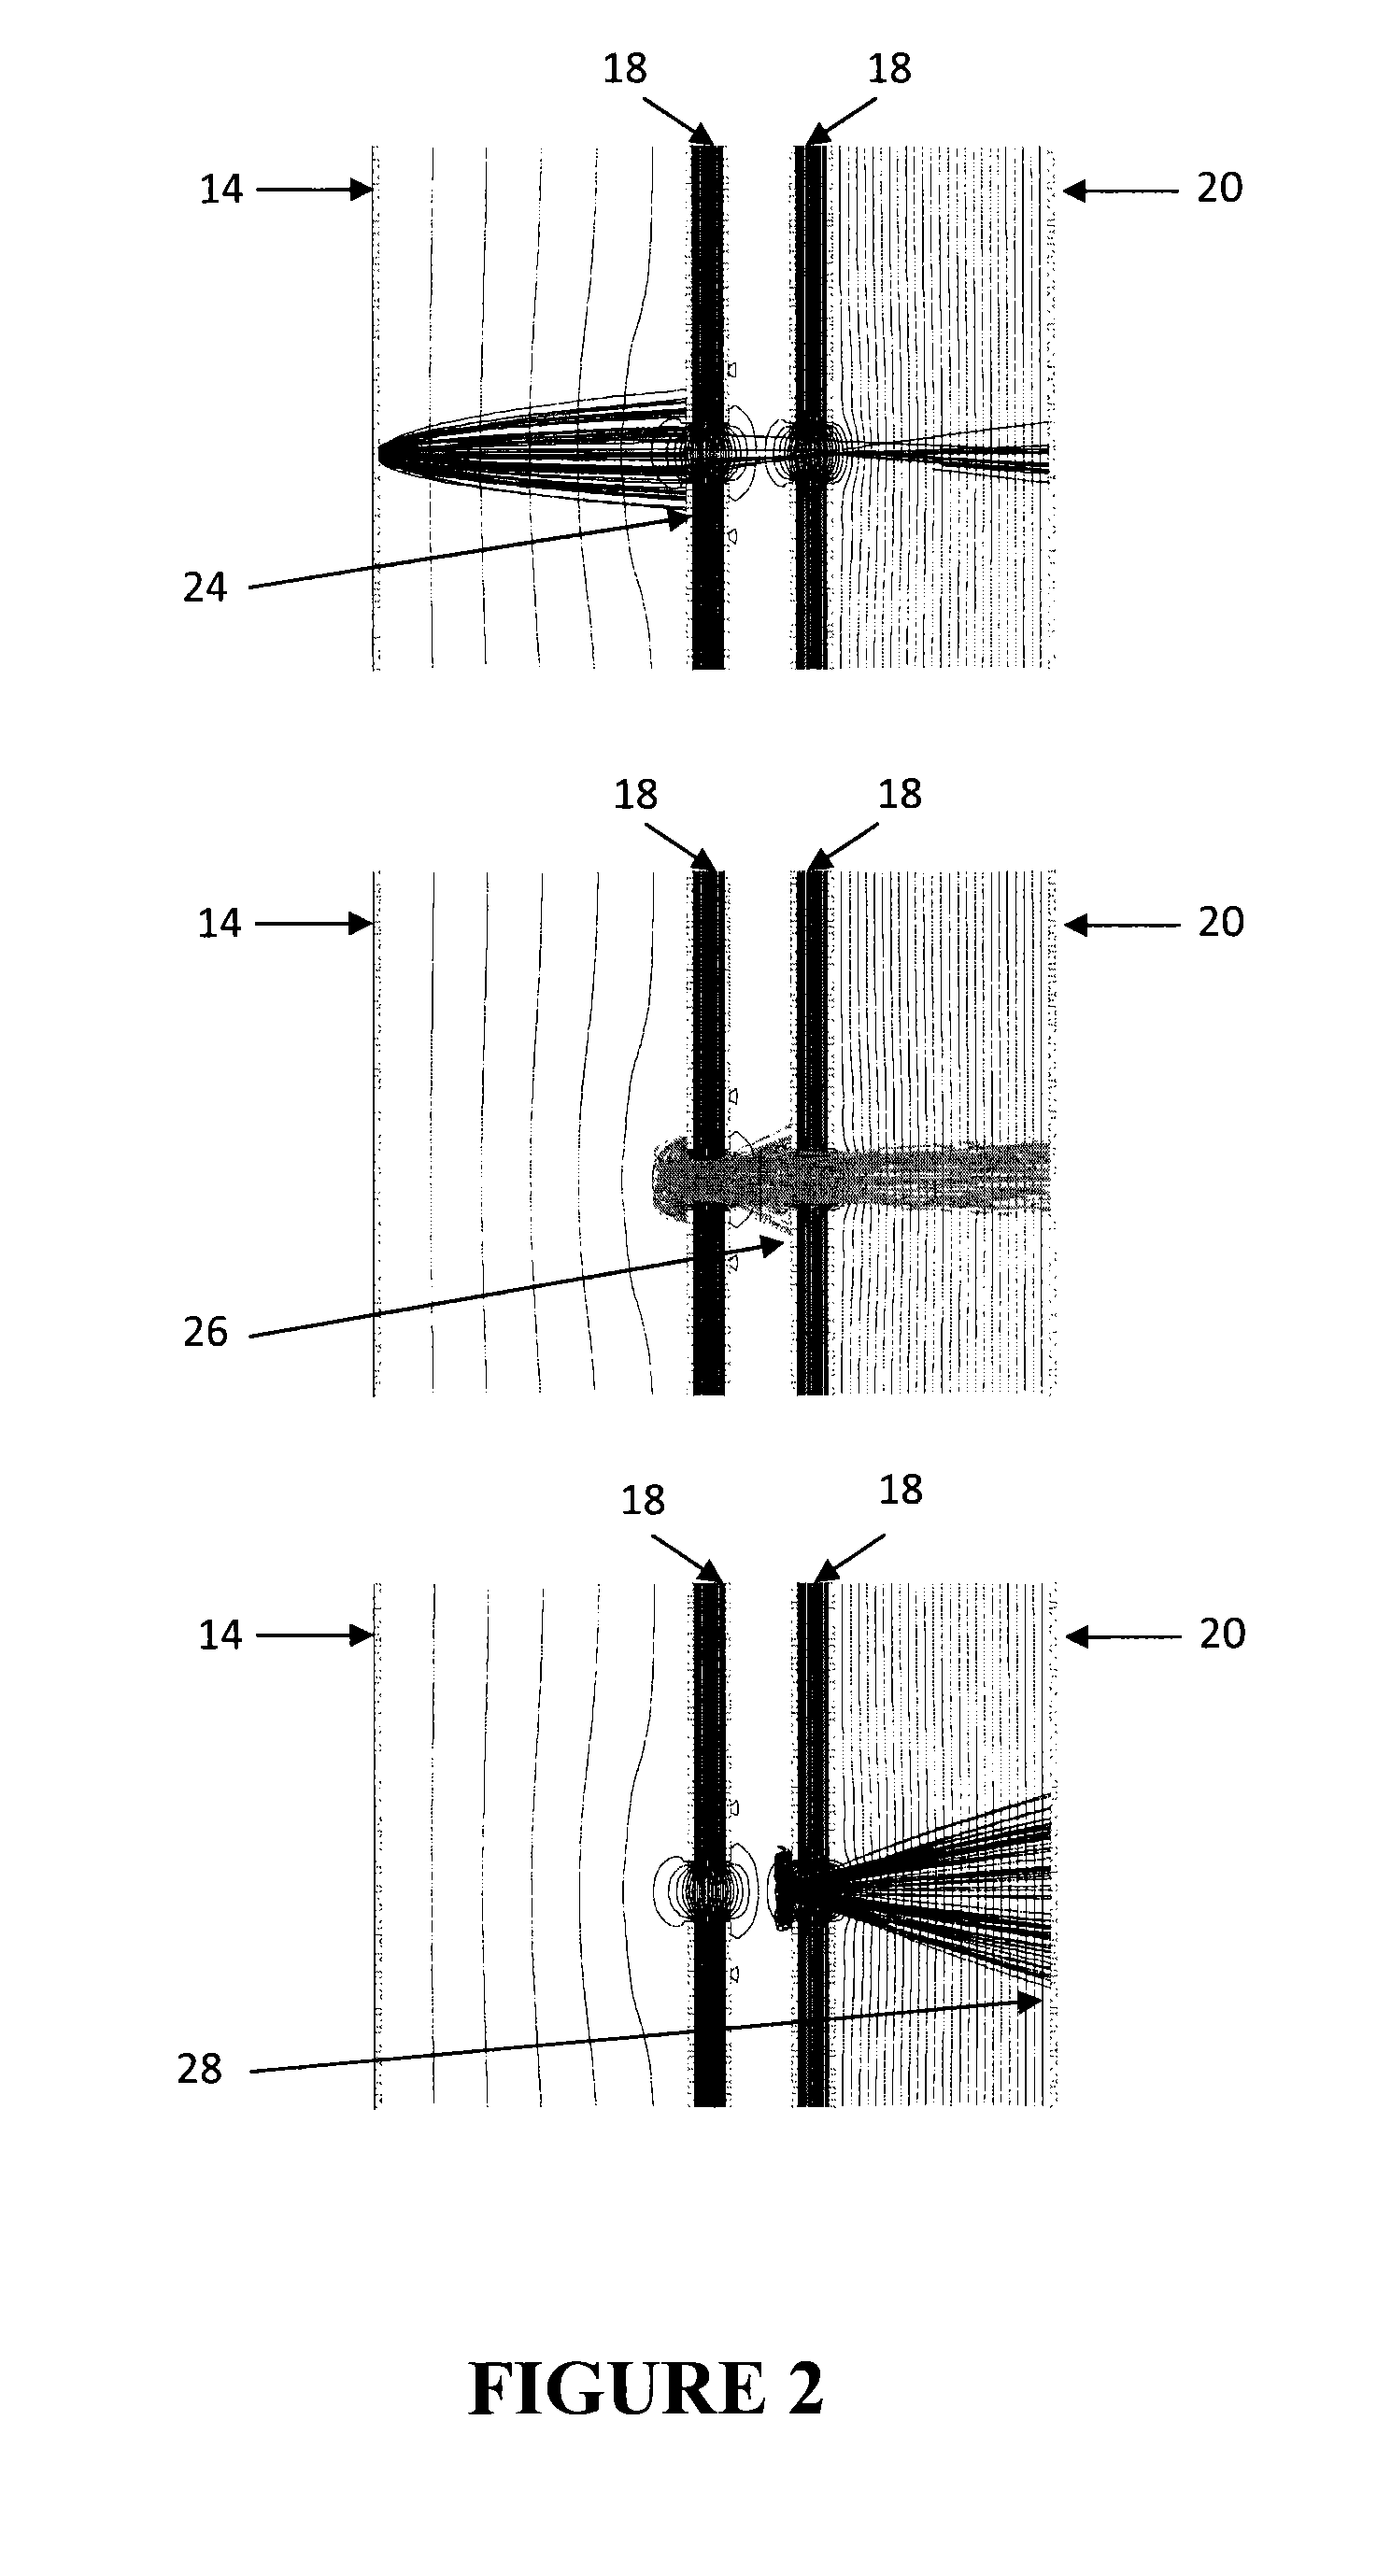 Microstructure photomultiplier assembly